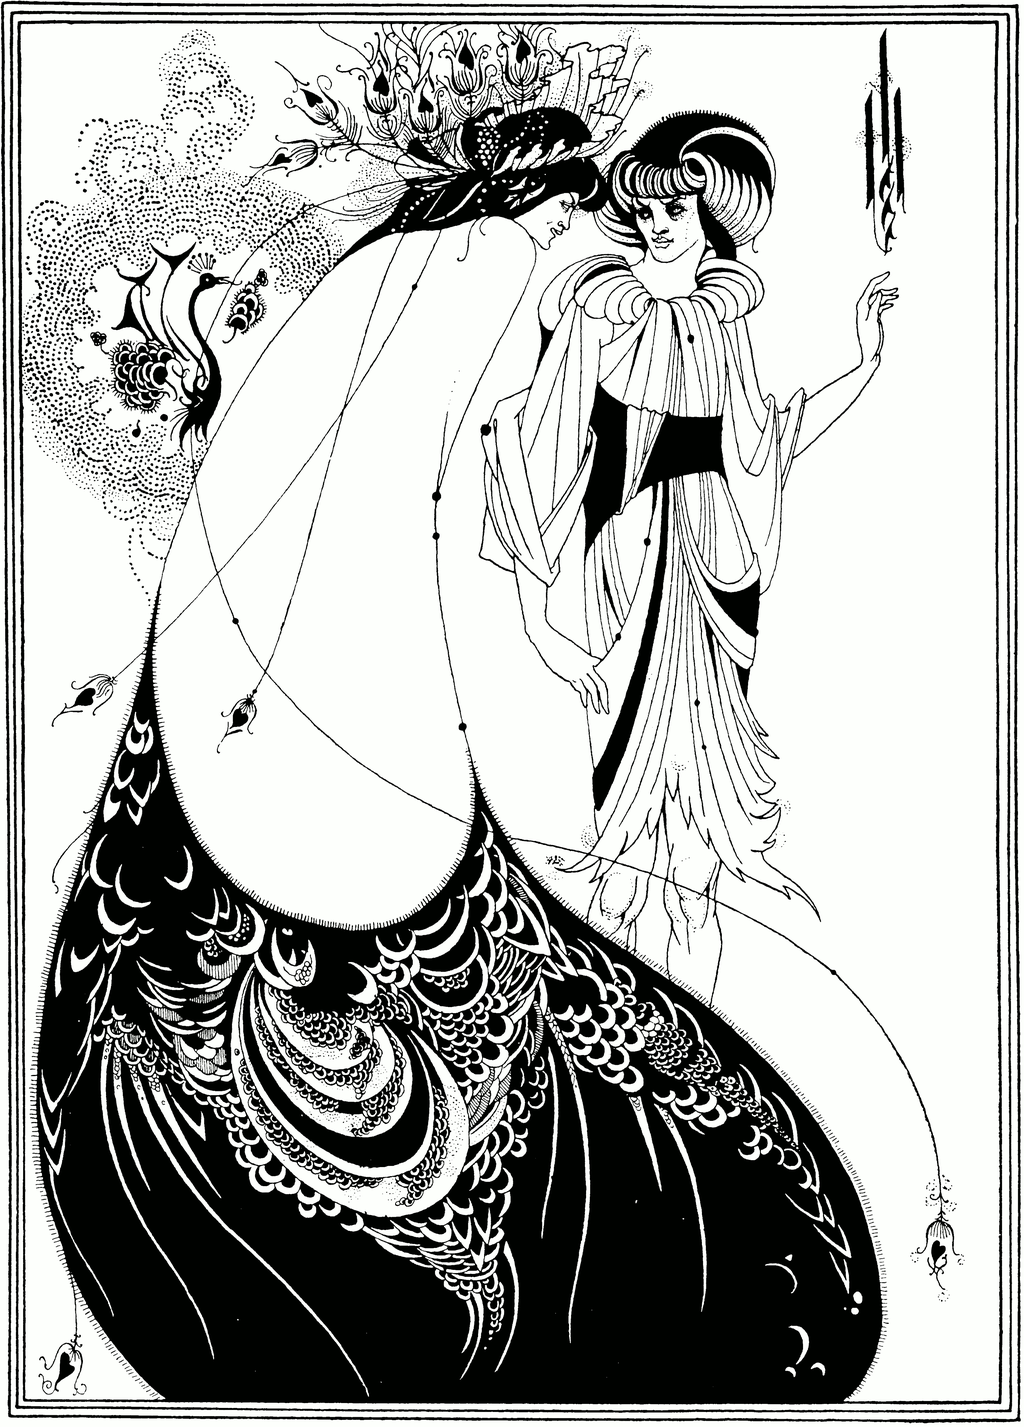 The Peacock Skirt (1893) pen and ink drawing by Aubrey Beardsley of a scene in Oscar Wilde's play Salomé in 1894.